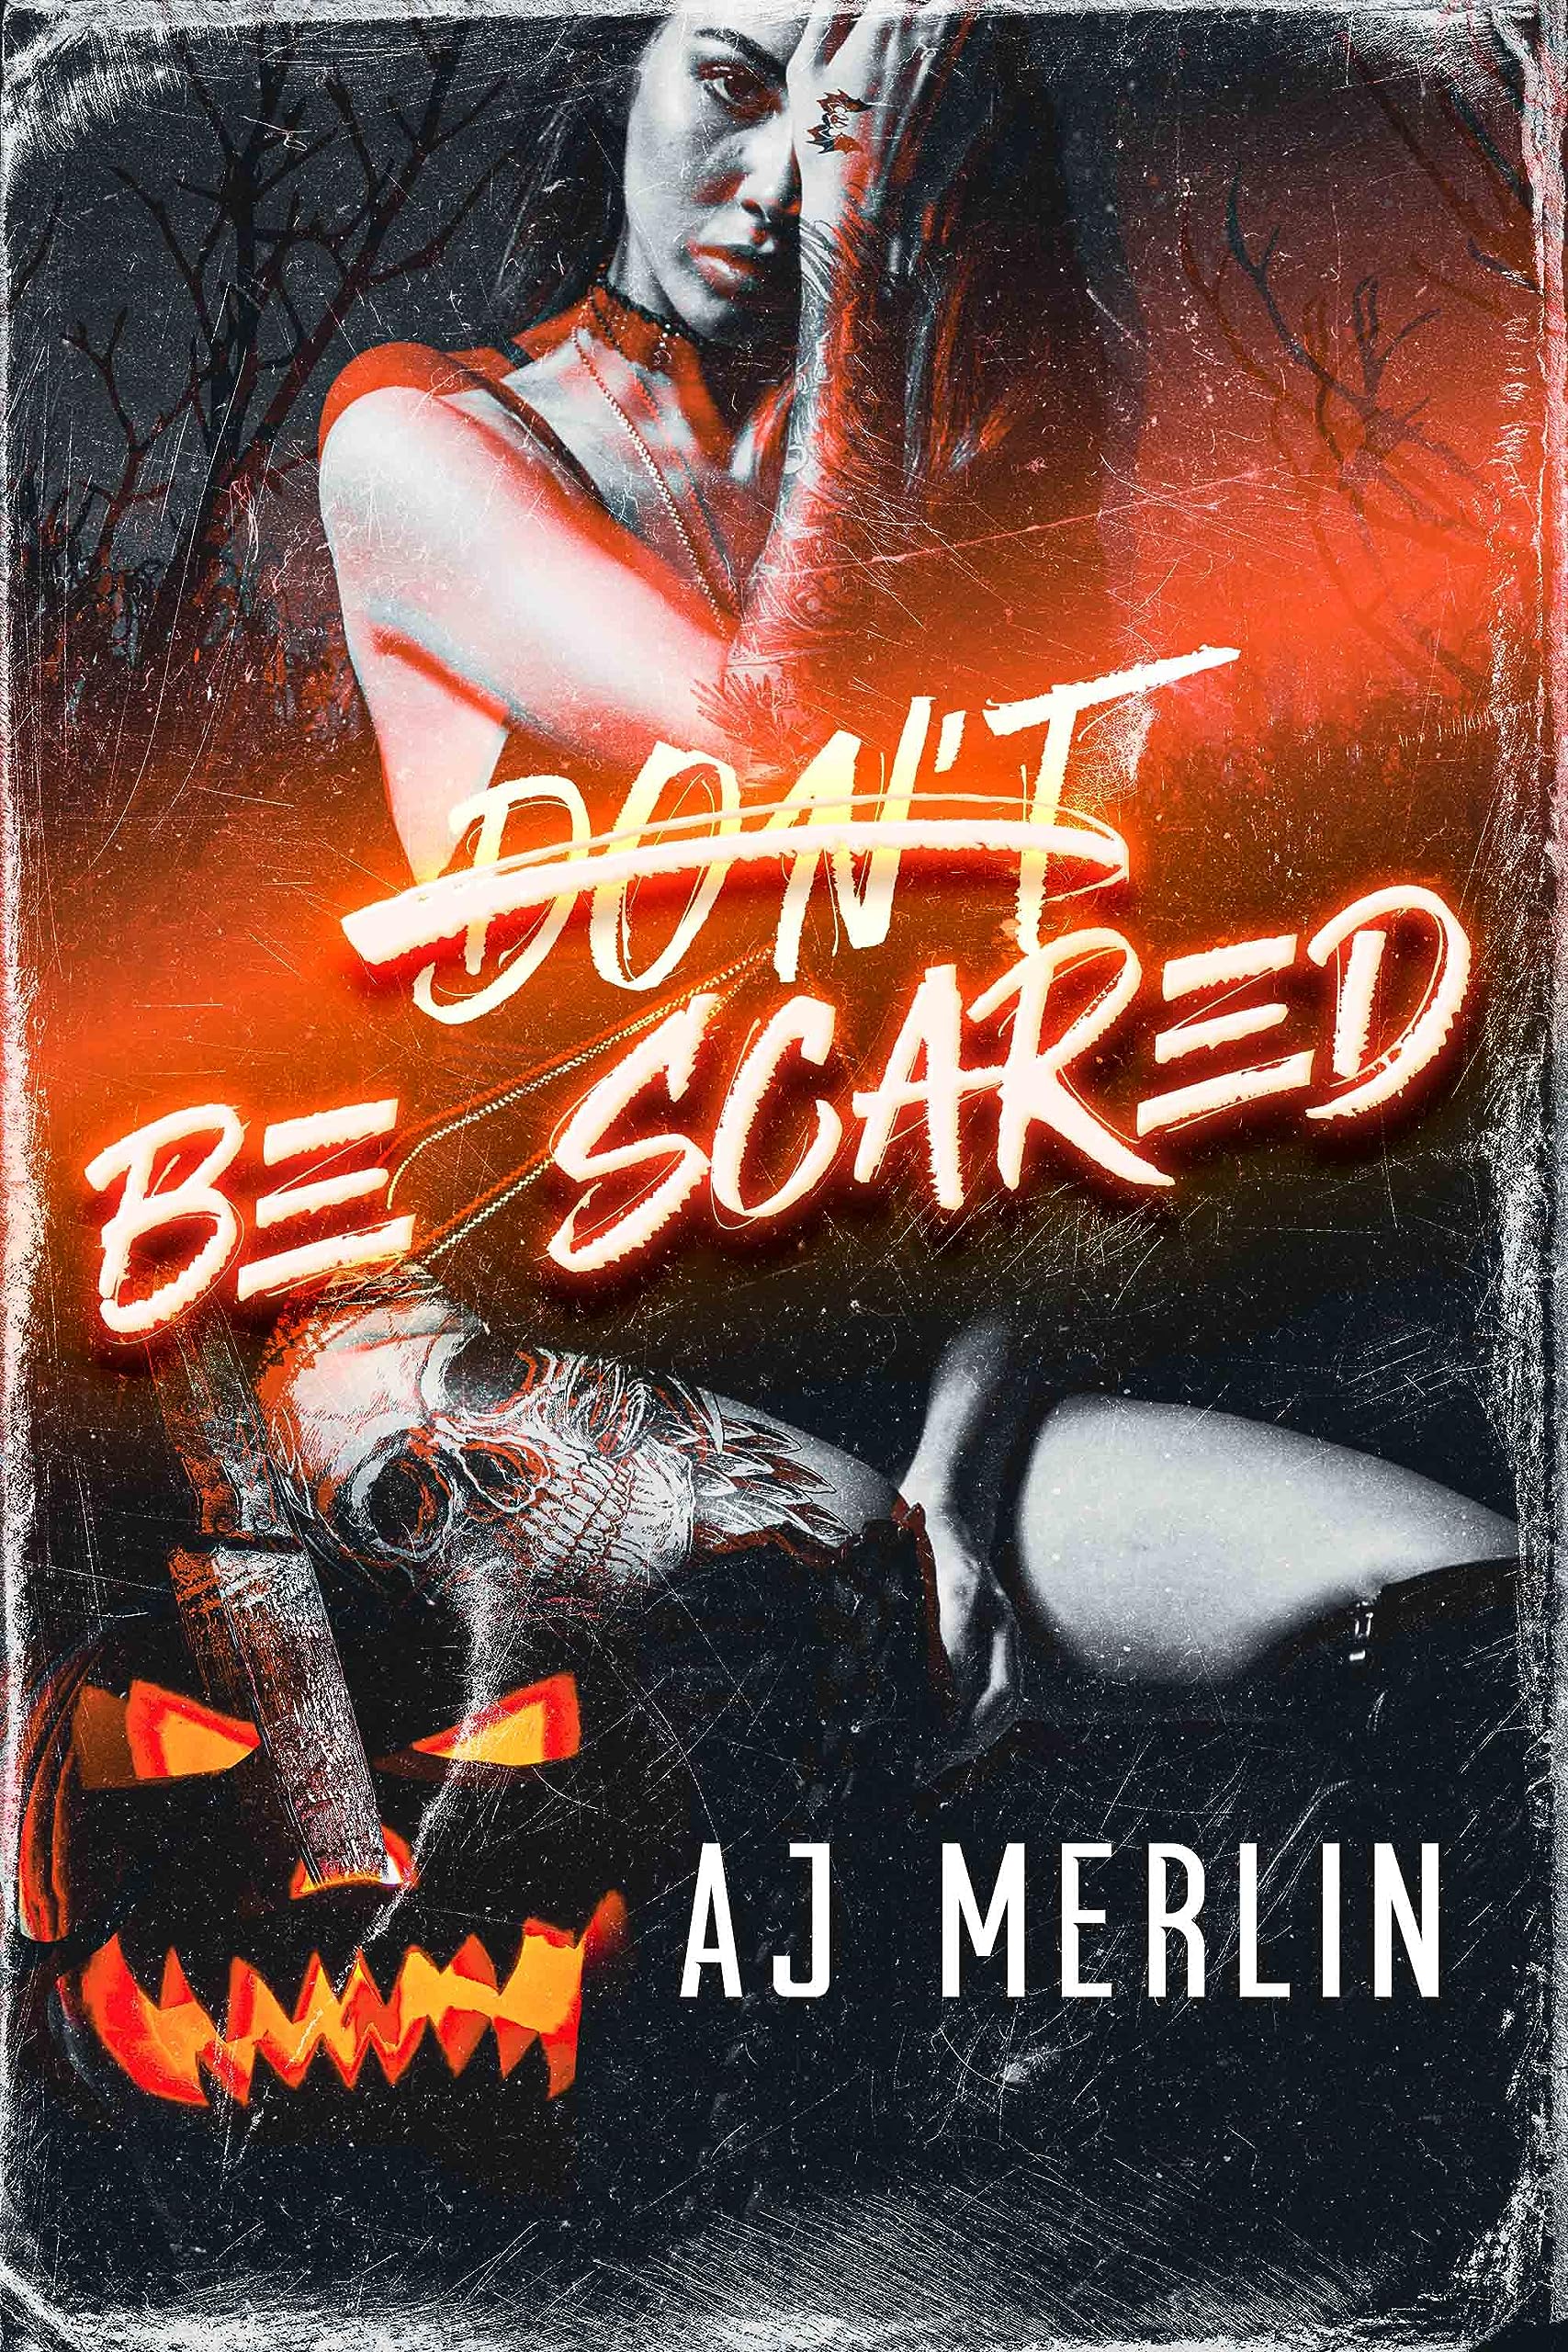 Book cover: Don't Be Scared by AJ Merlin